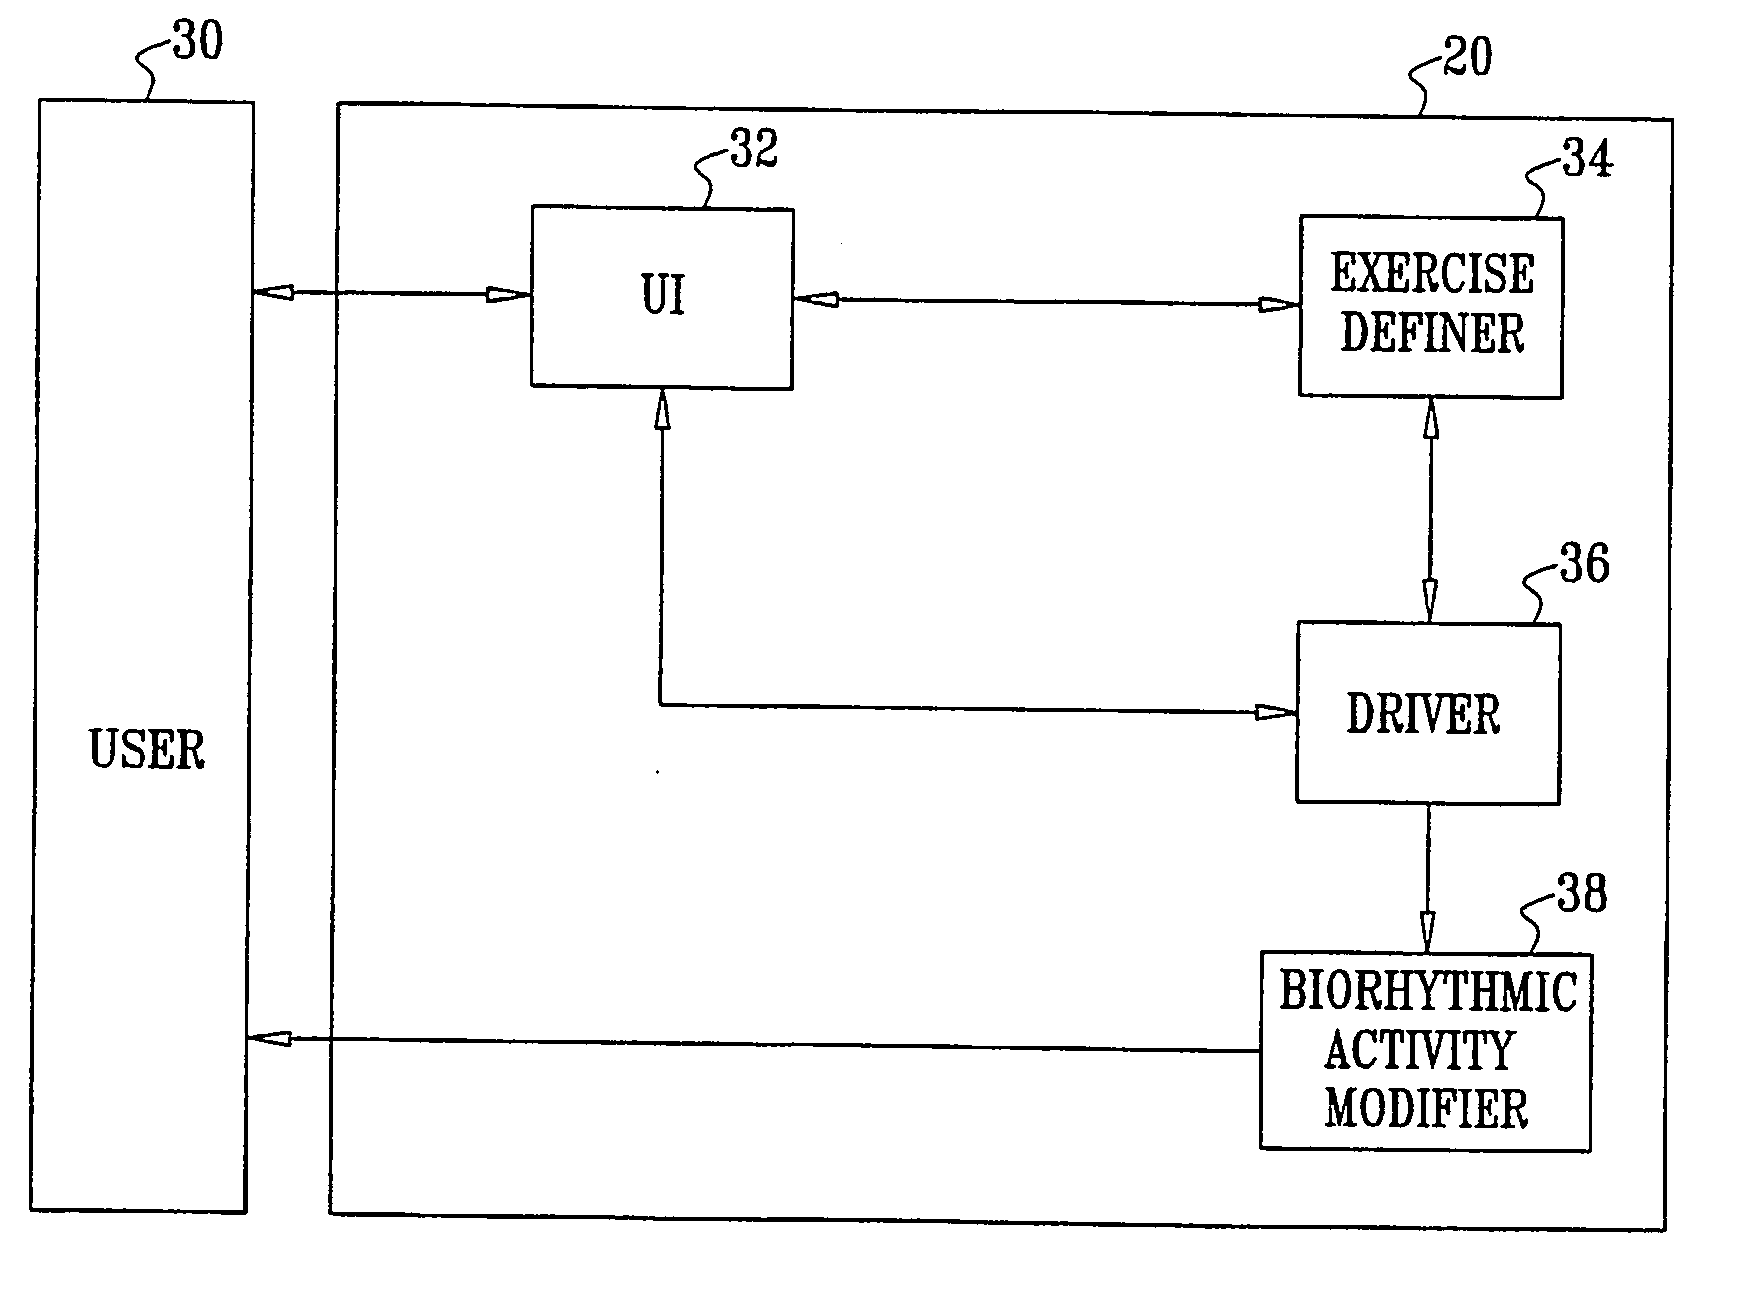 Generalized metronome for modification of biorhythmic activity